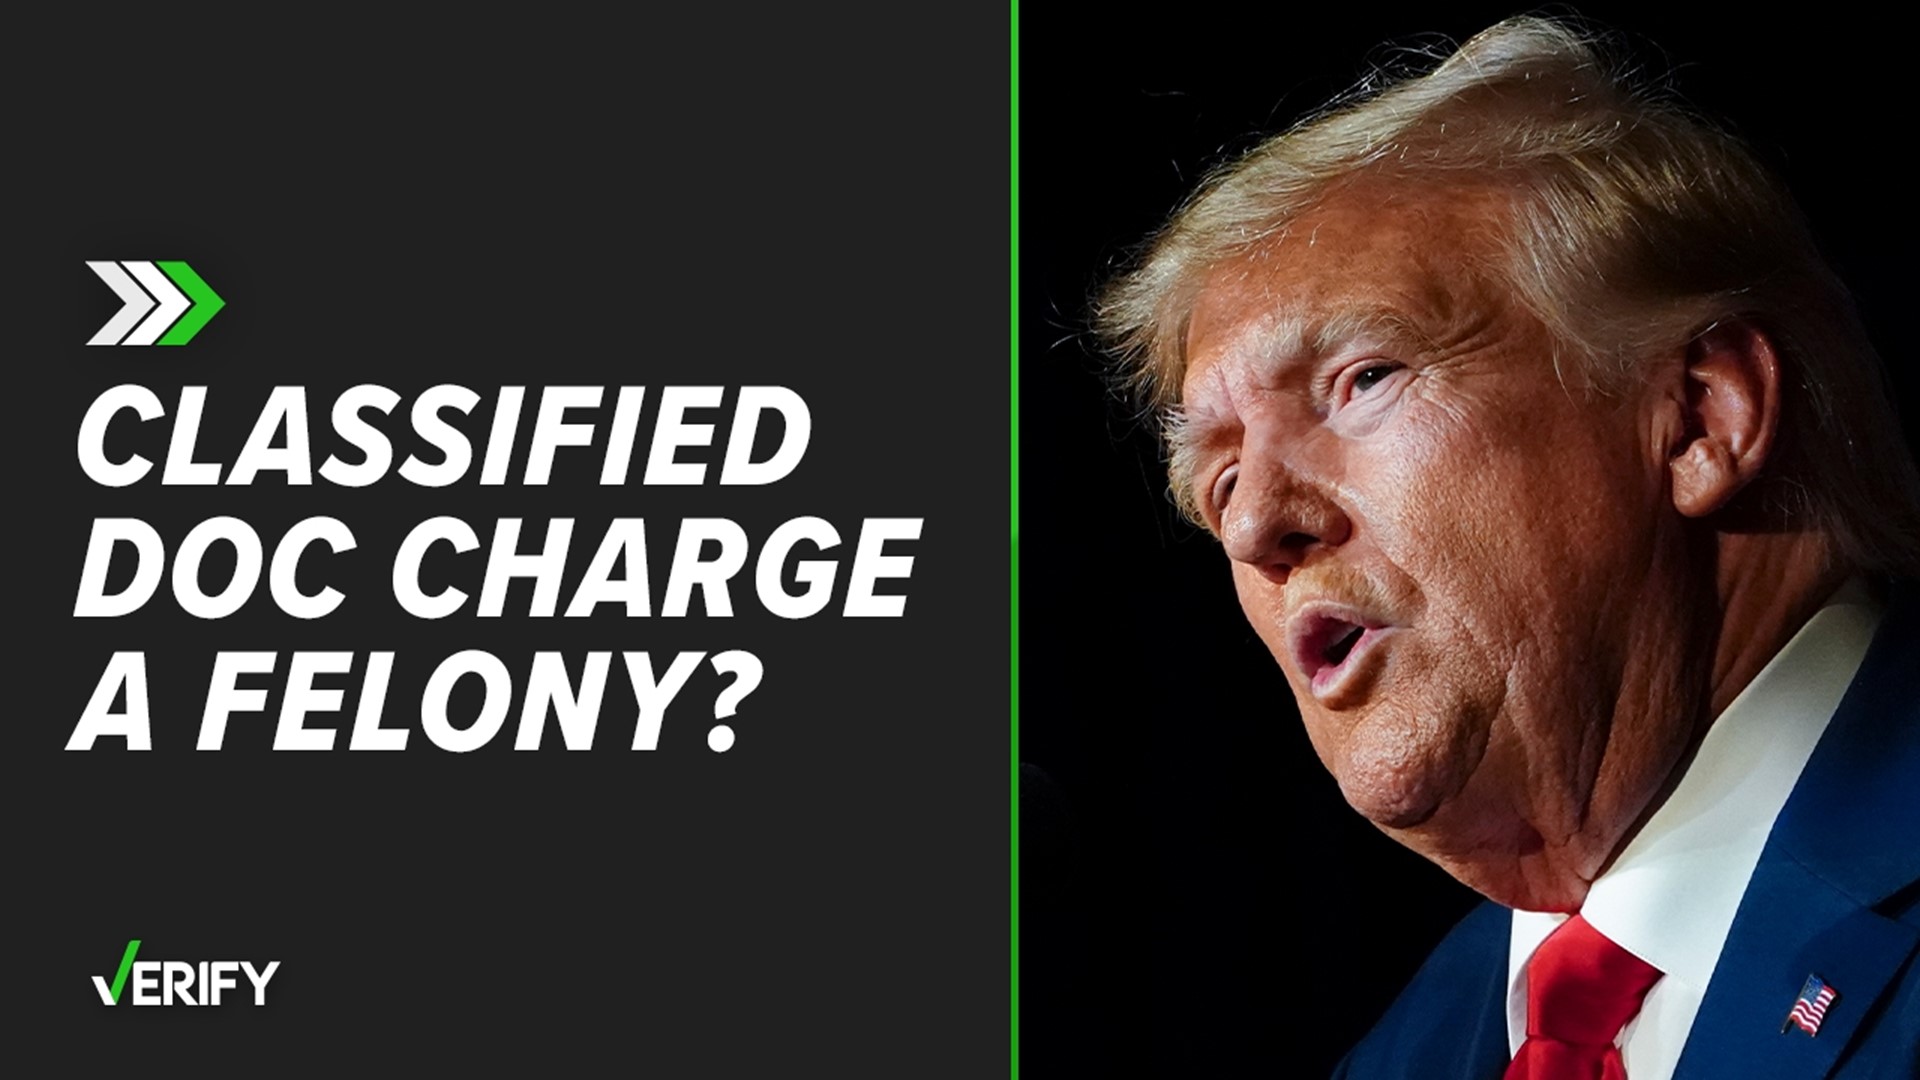 After Trump’s federal indictment, online claims said he made mishandling classified documents a felony instead of a misdemeanor while president. That’s true.